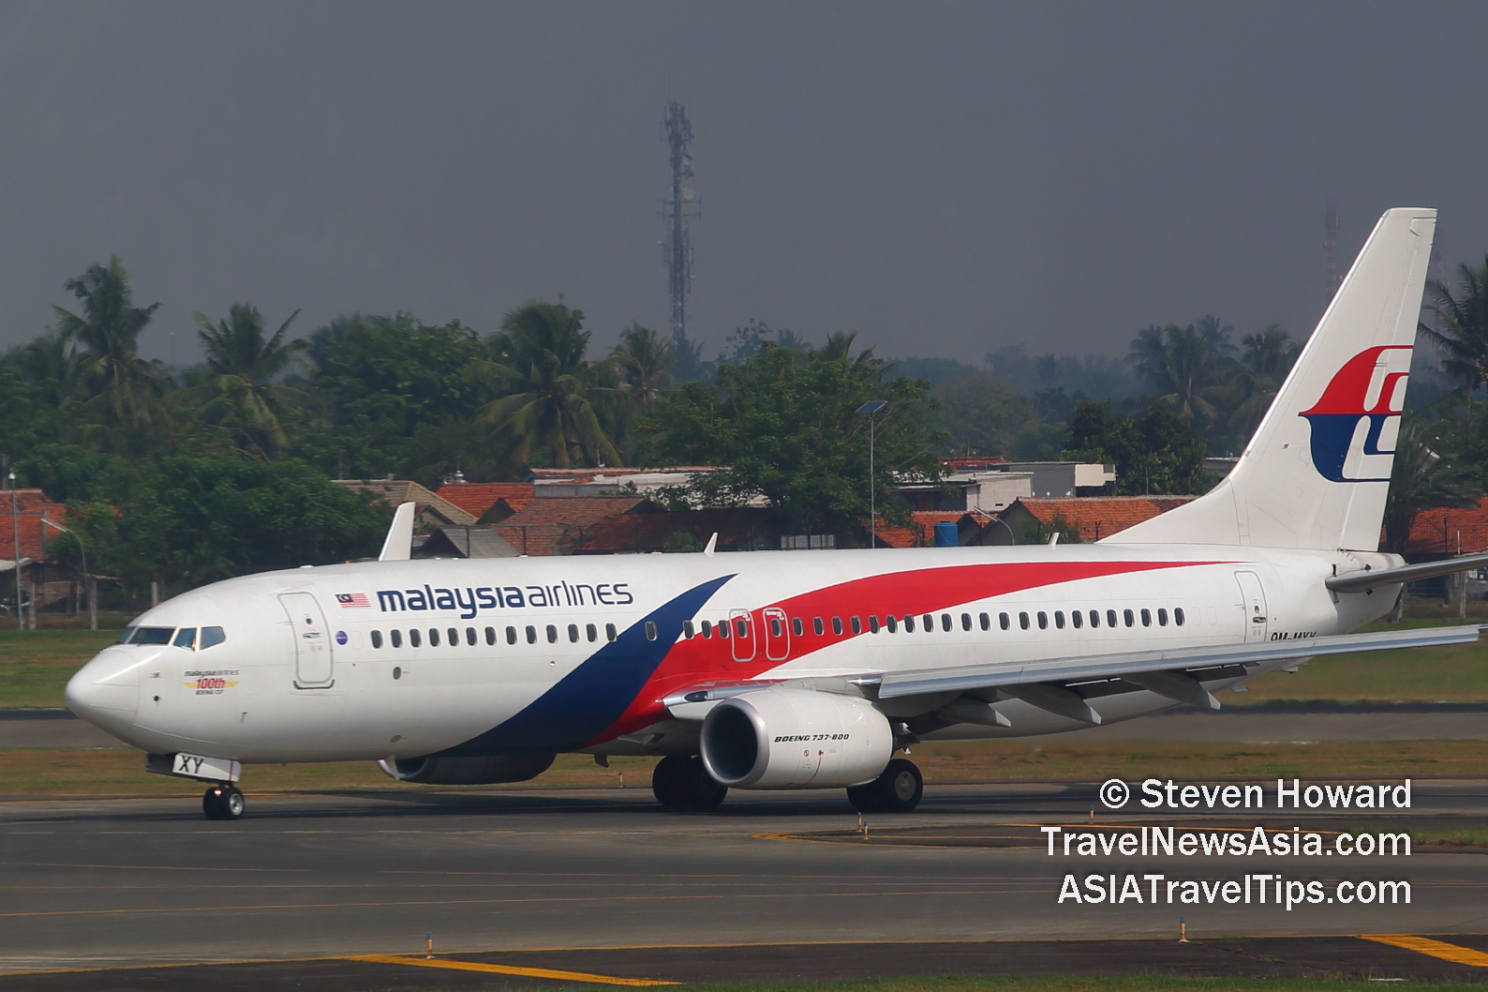 Malaysia Airlines Boeing 737 MAX 8. Picture by Steven Howard of TravelNewsAsia.com Click to enlarge.